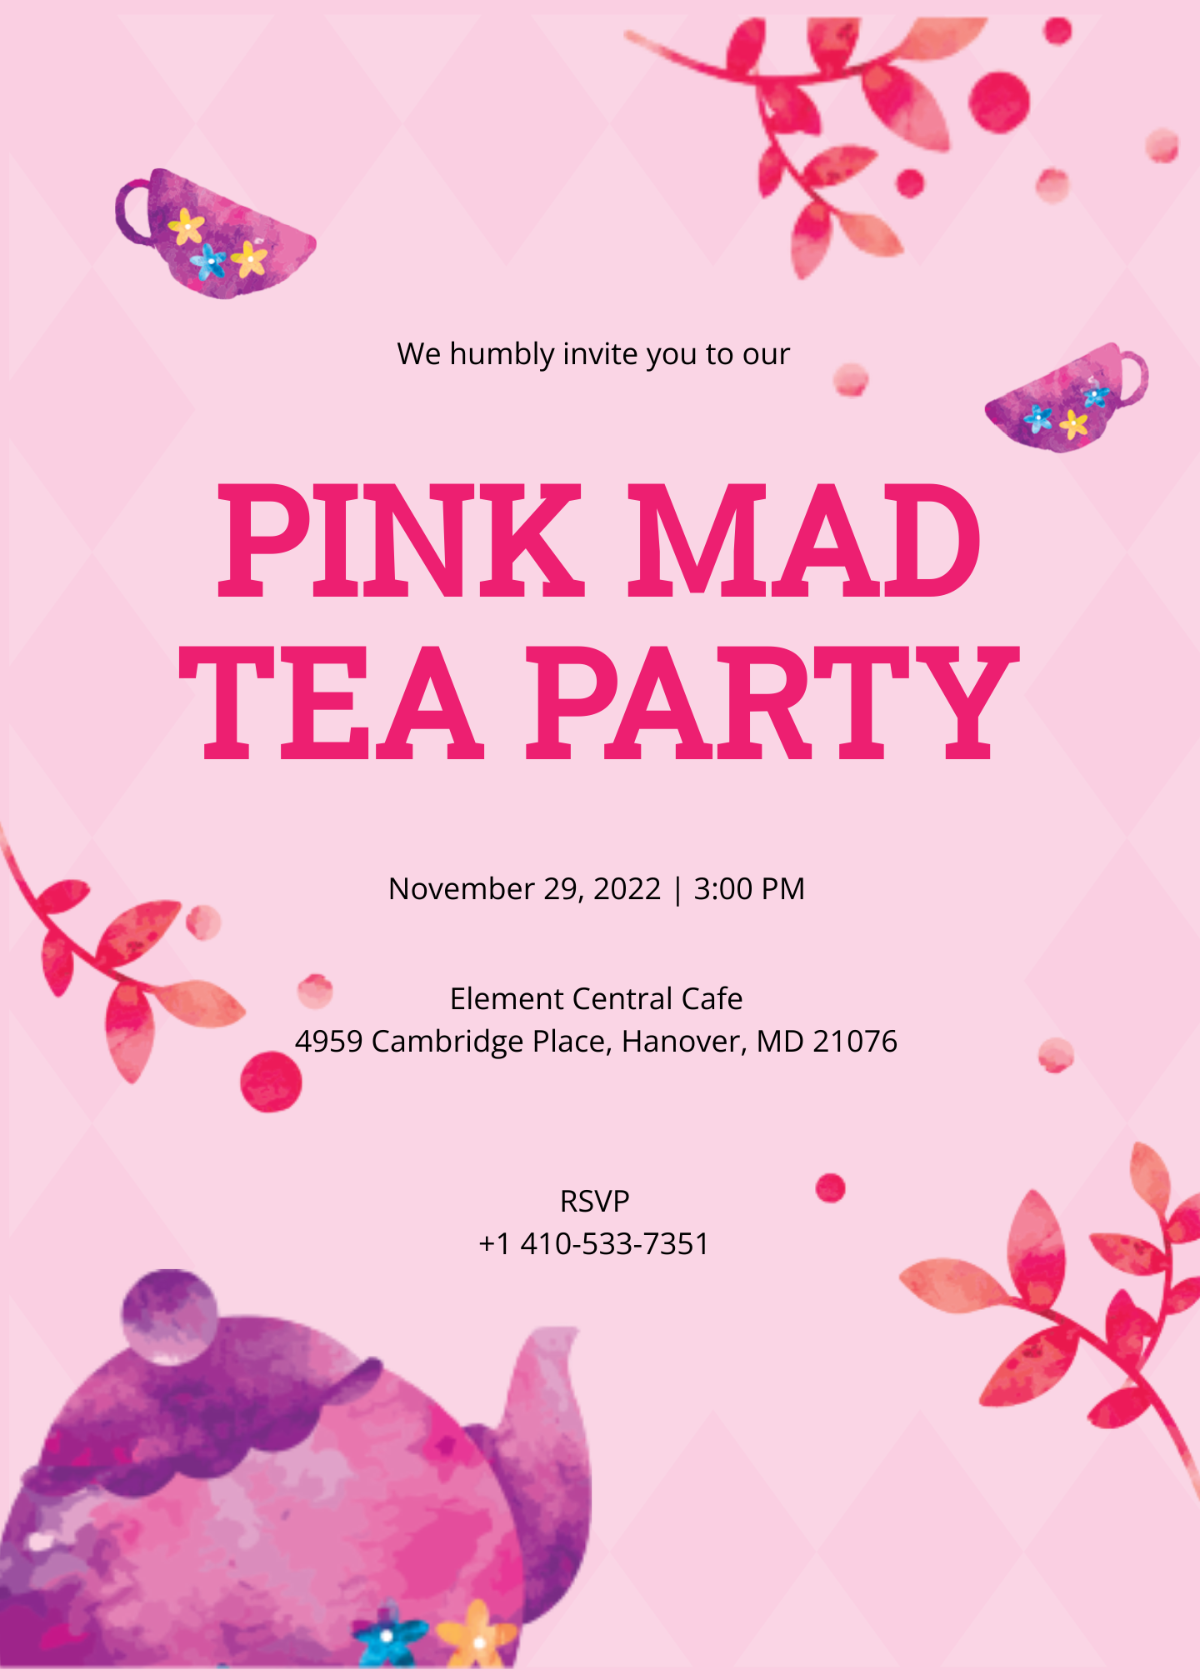 Pink Mad Tea Party Invitation Template